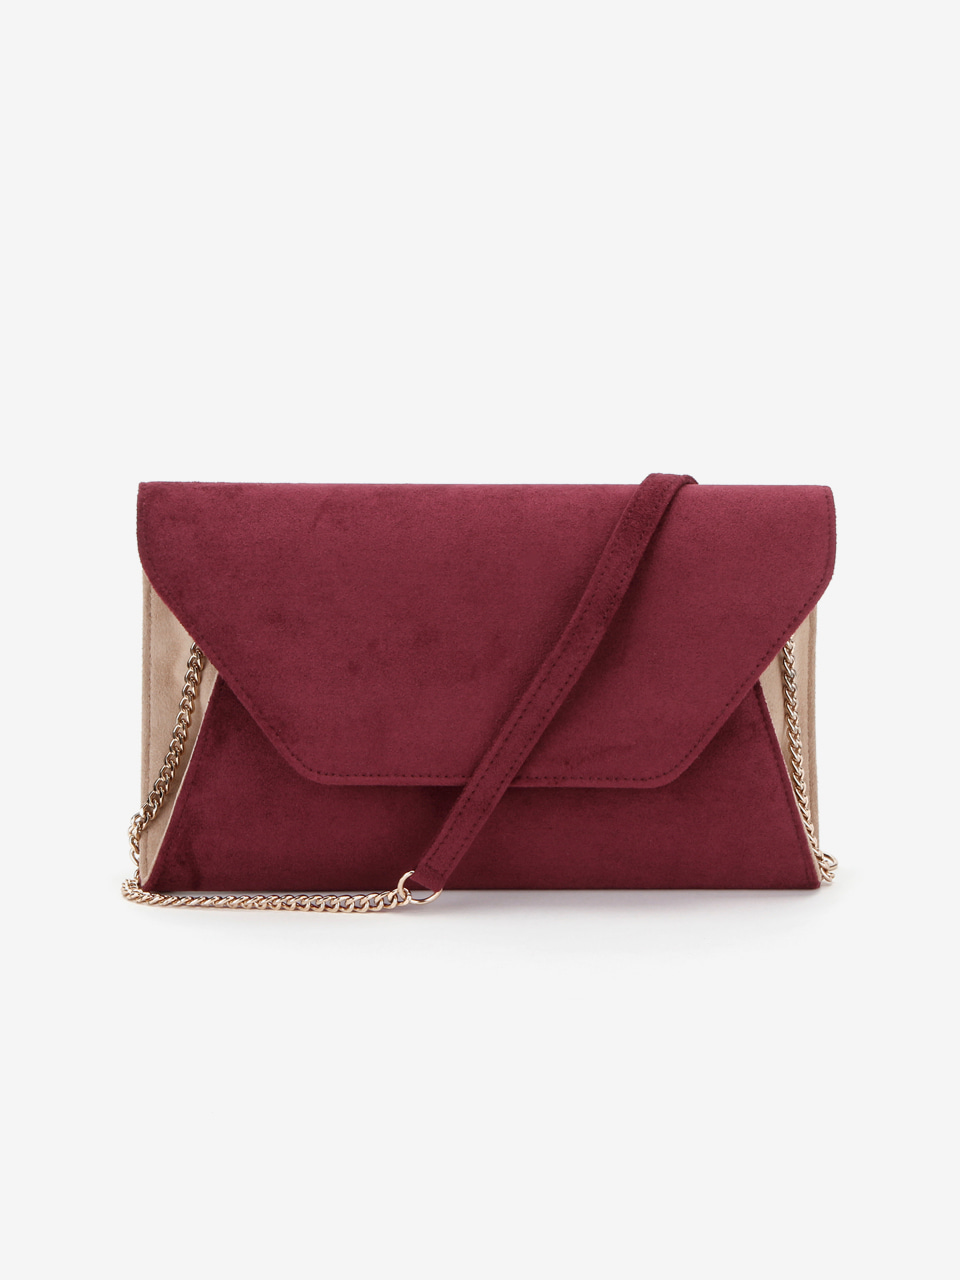 Charming Suede Clutch_Wine